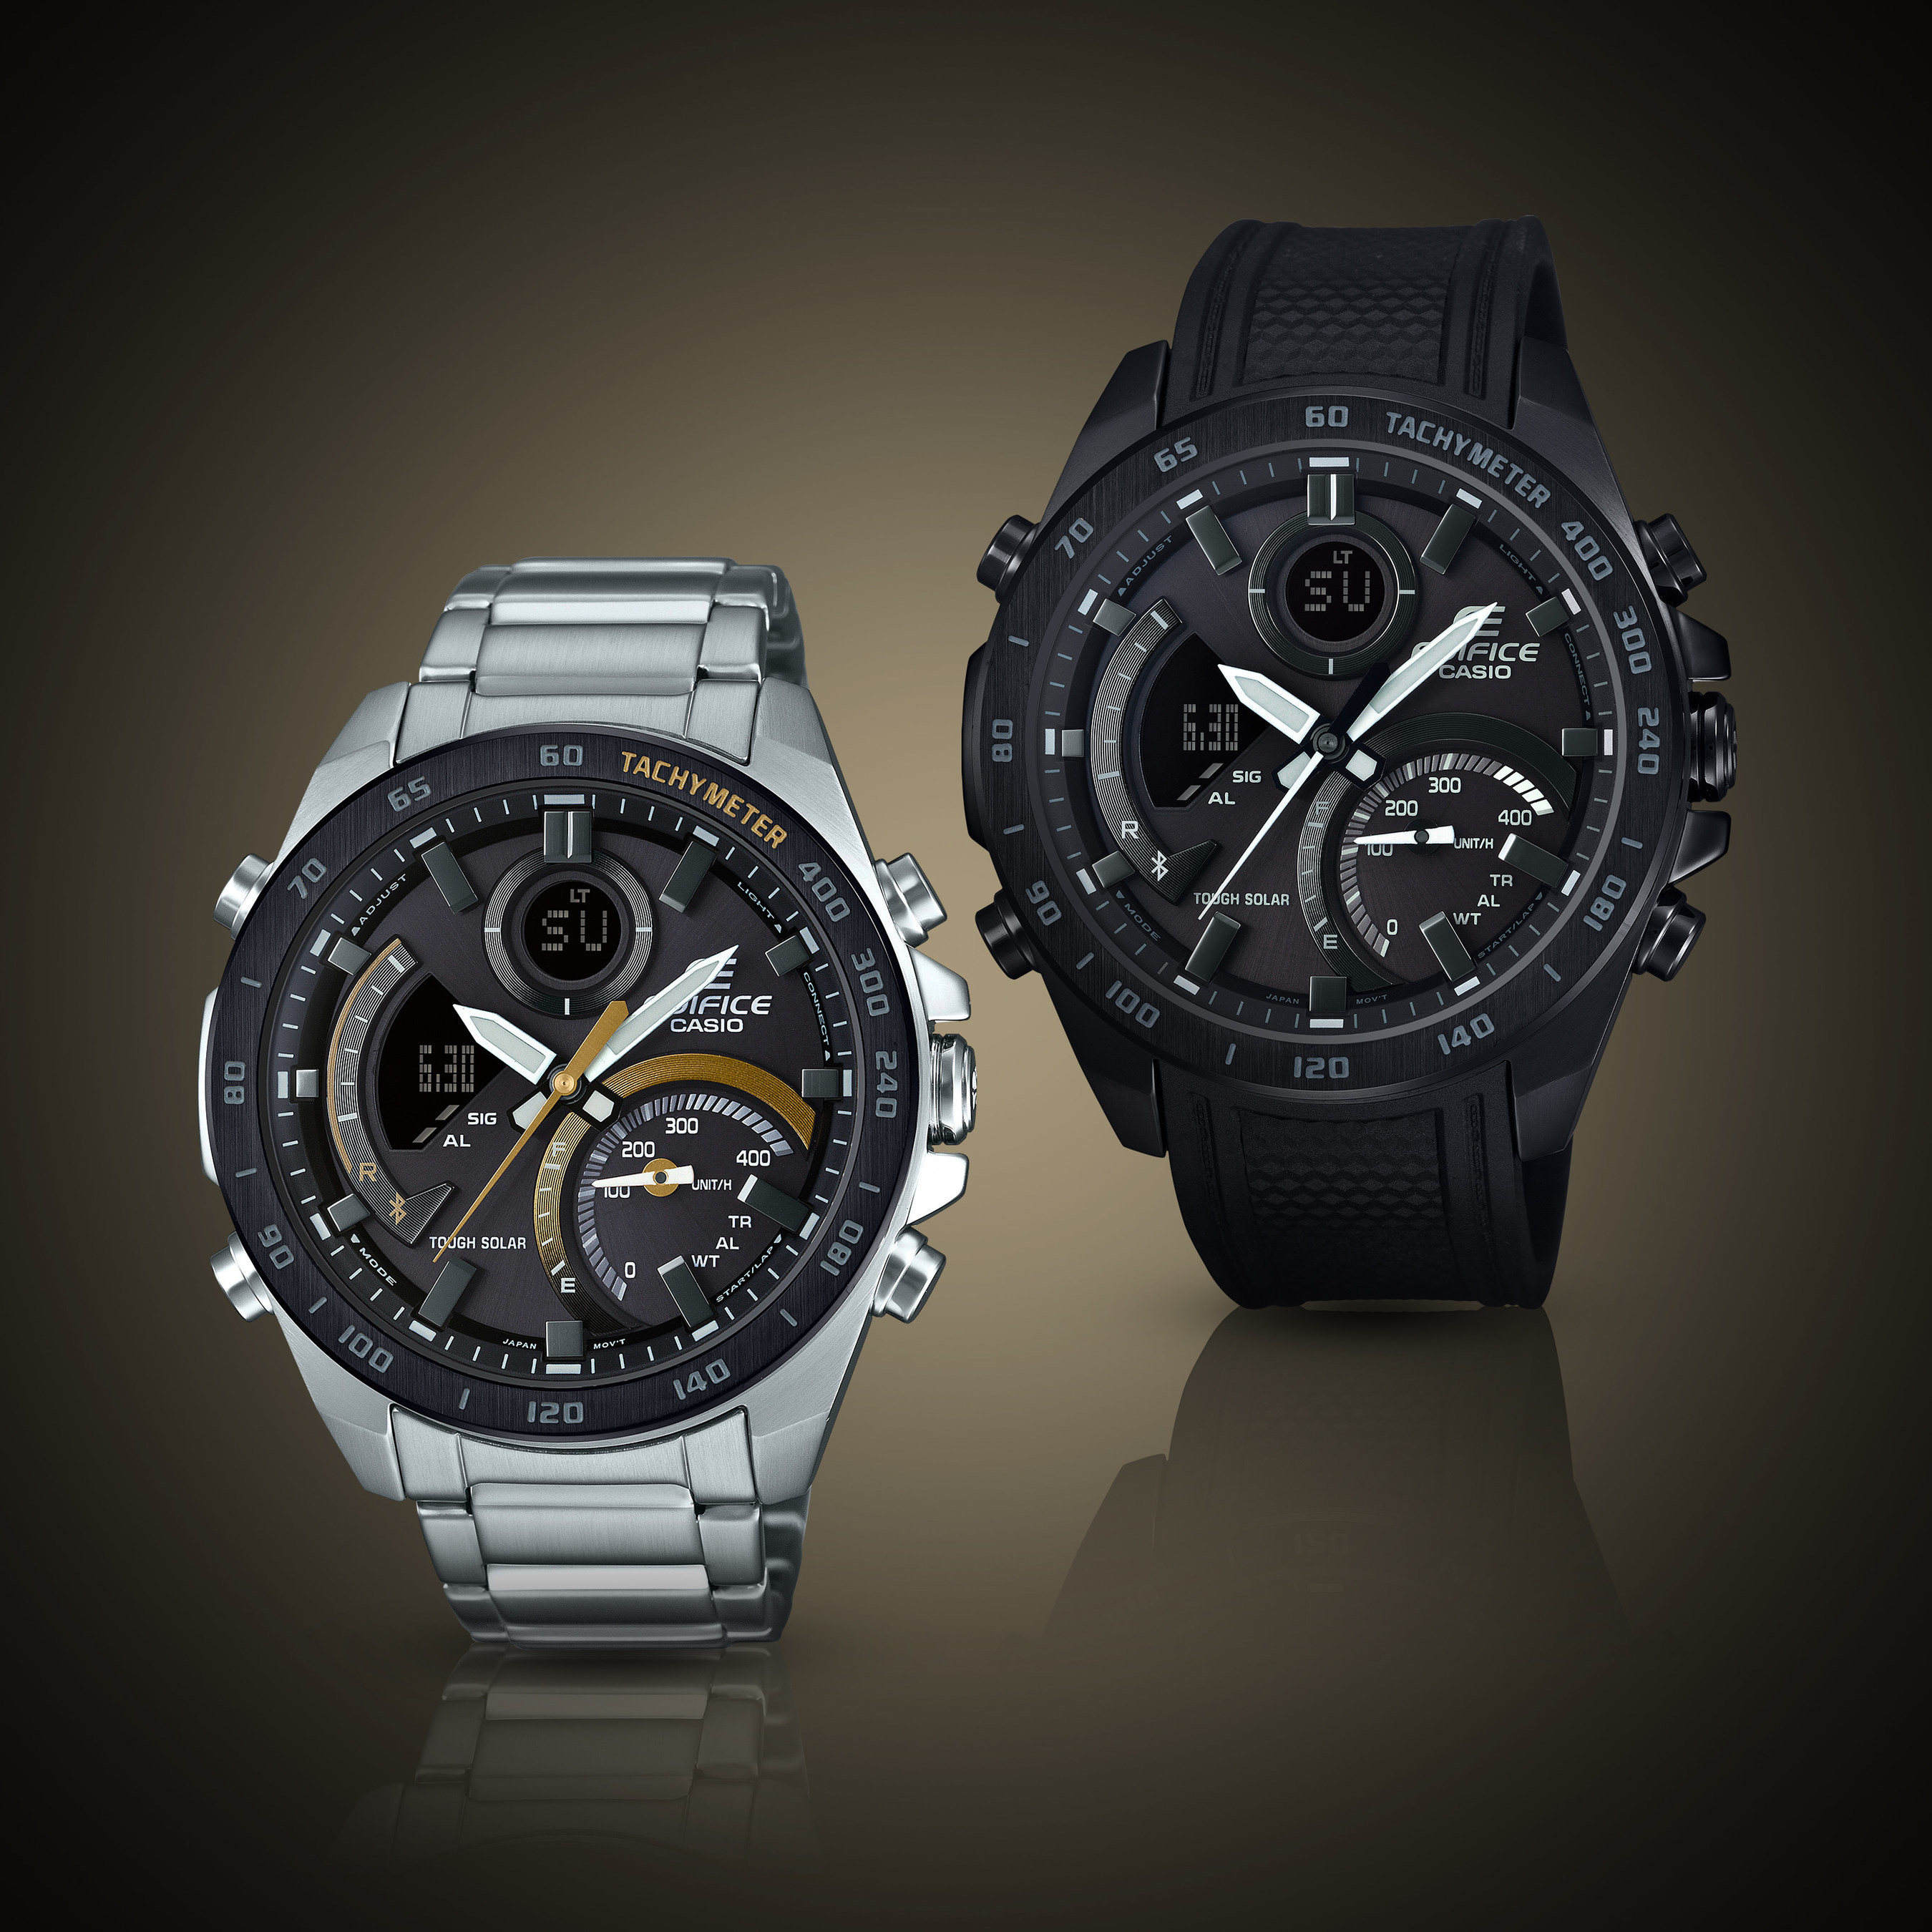 Casio Adds New Variations To EDIFICE Collection